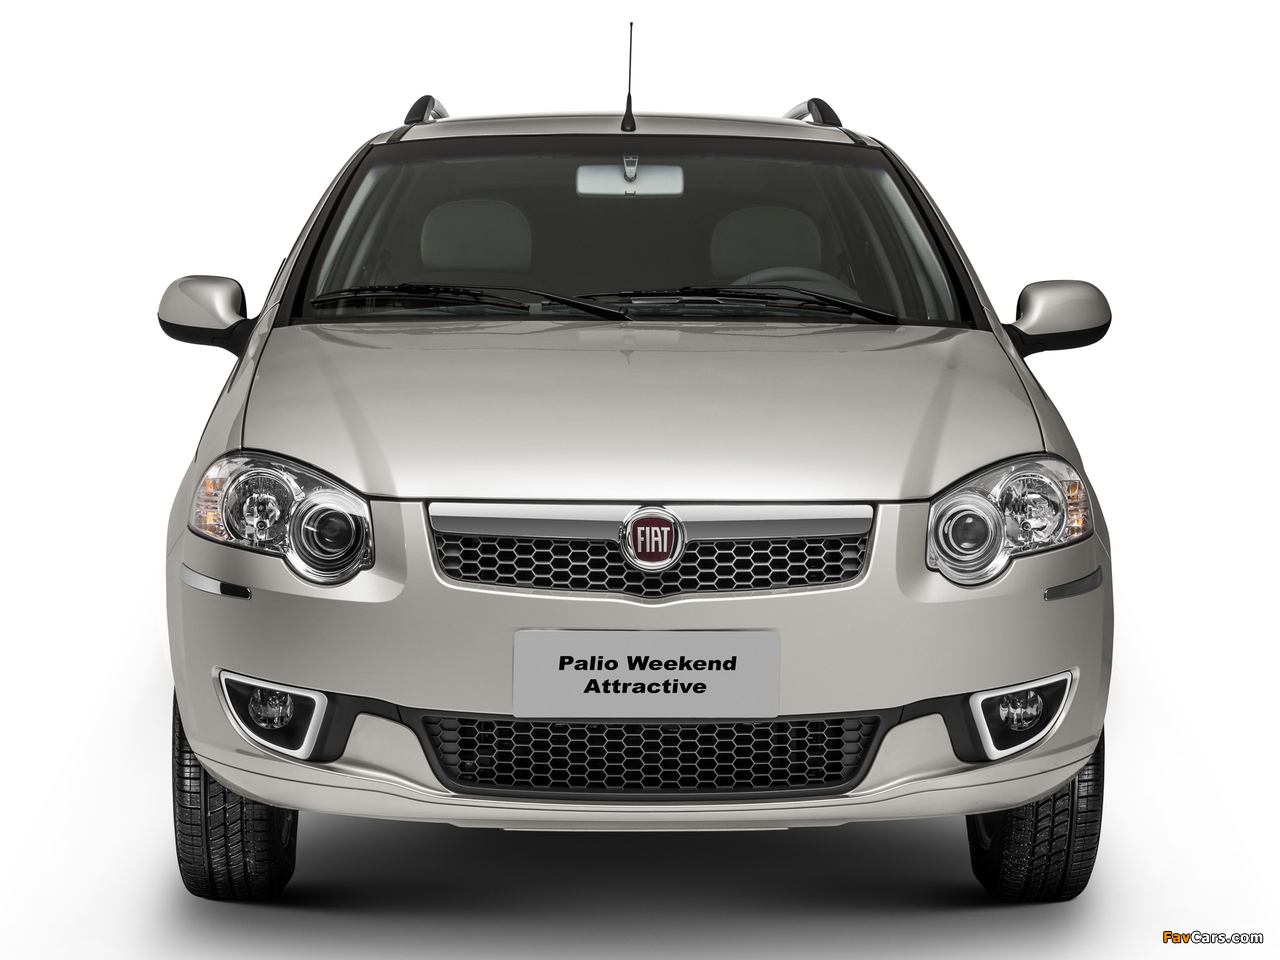 Fiat Palio Weekend (178) 2012 images (1280 x 960)